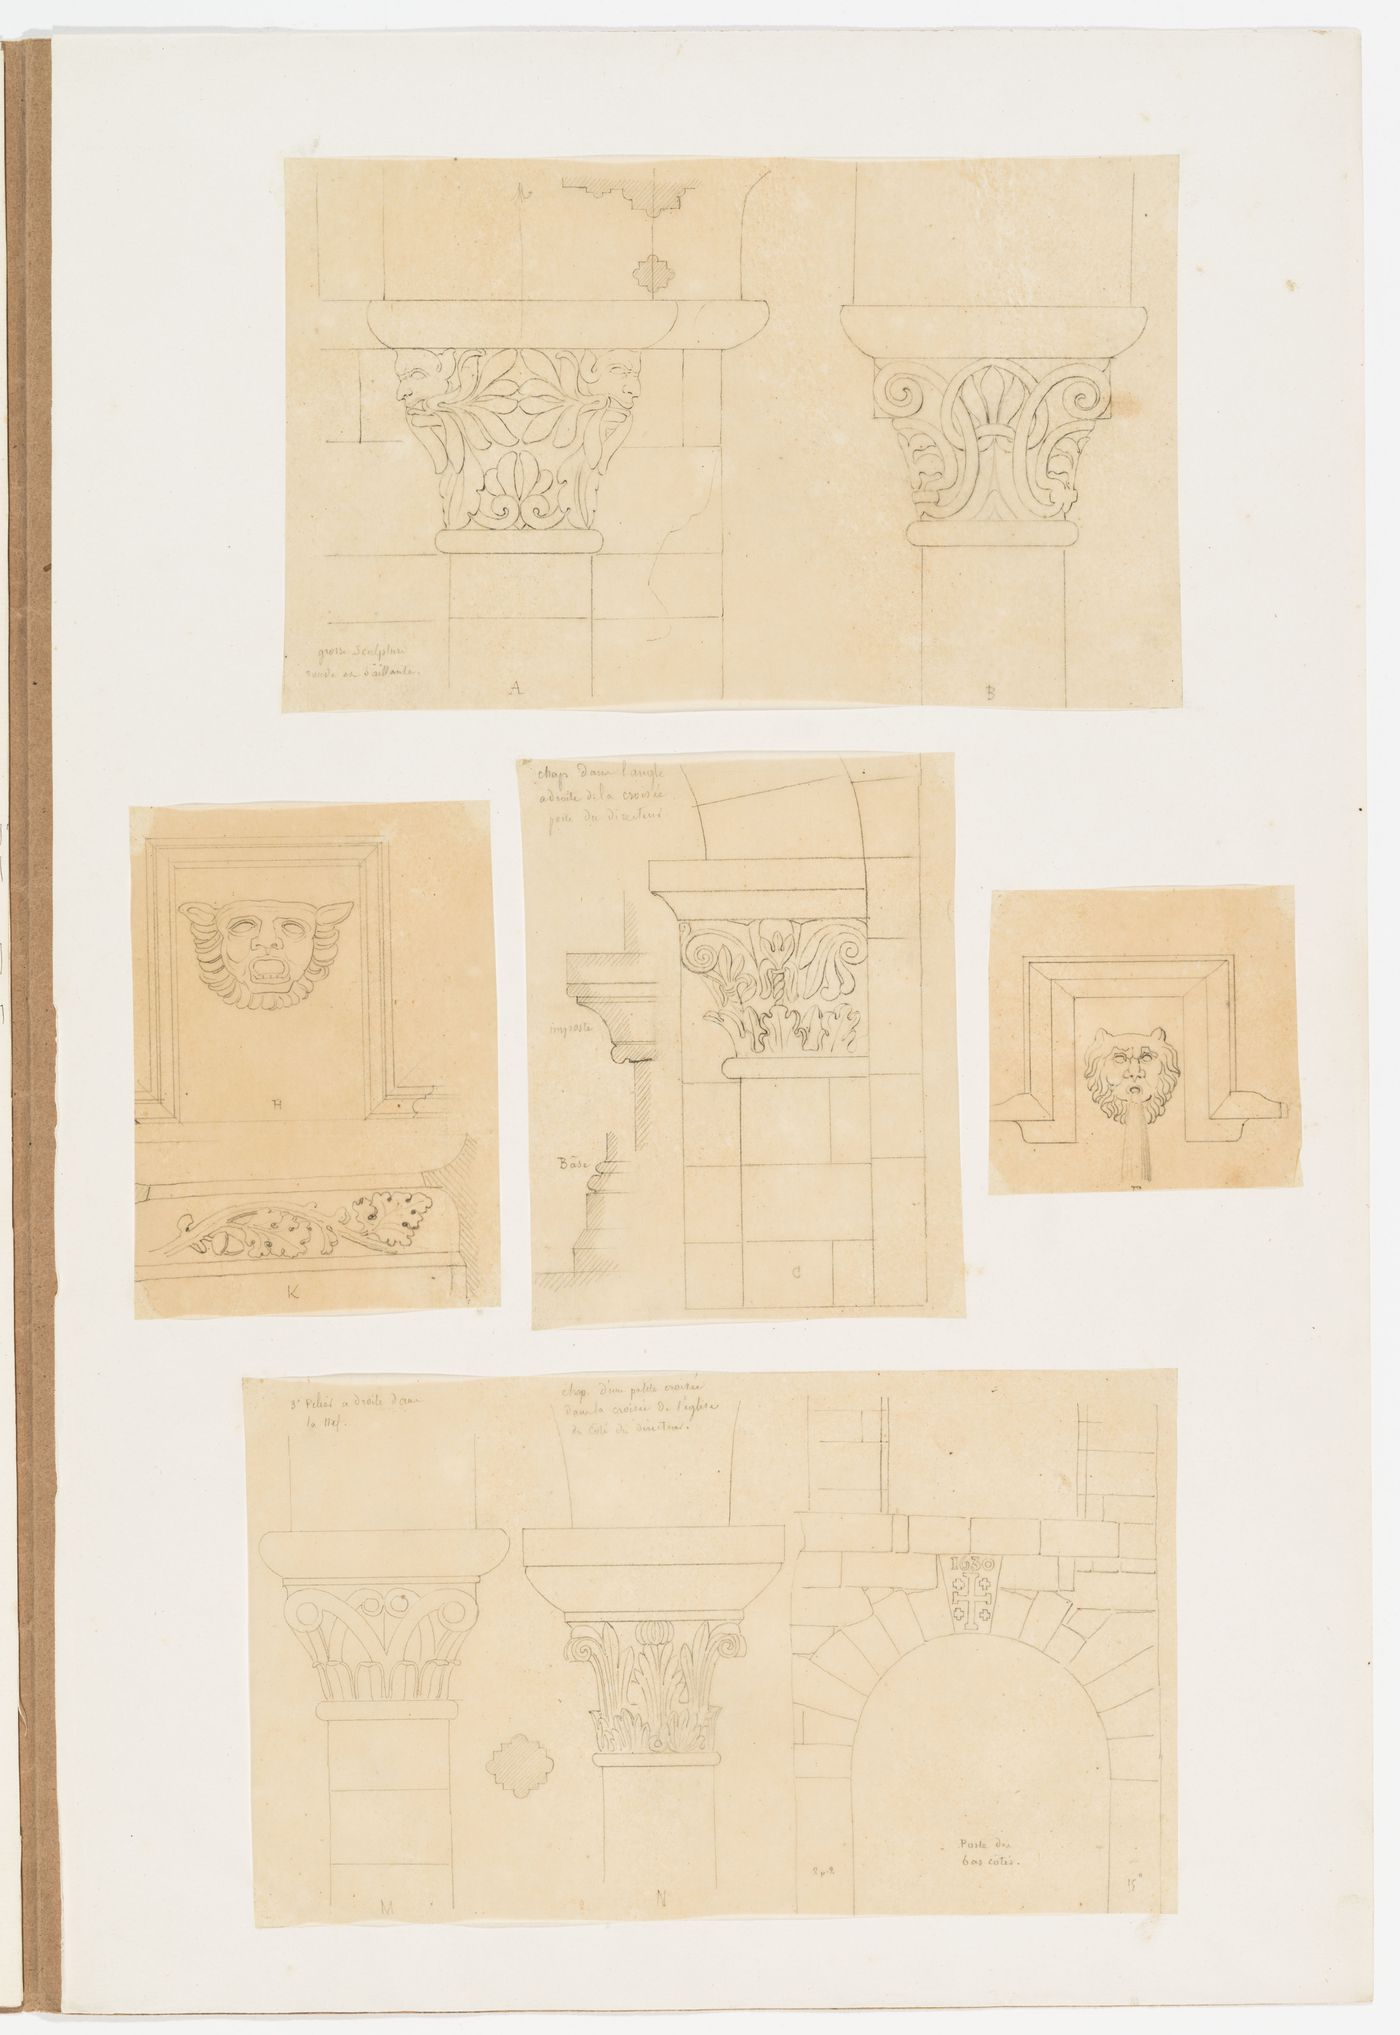 Five drawings of Gothic architectural elements and ornament: pilasters, columns, capitals, gargoyles, a molding, and an archway